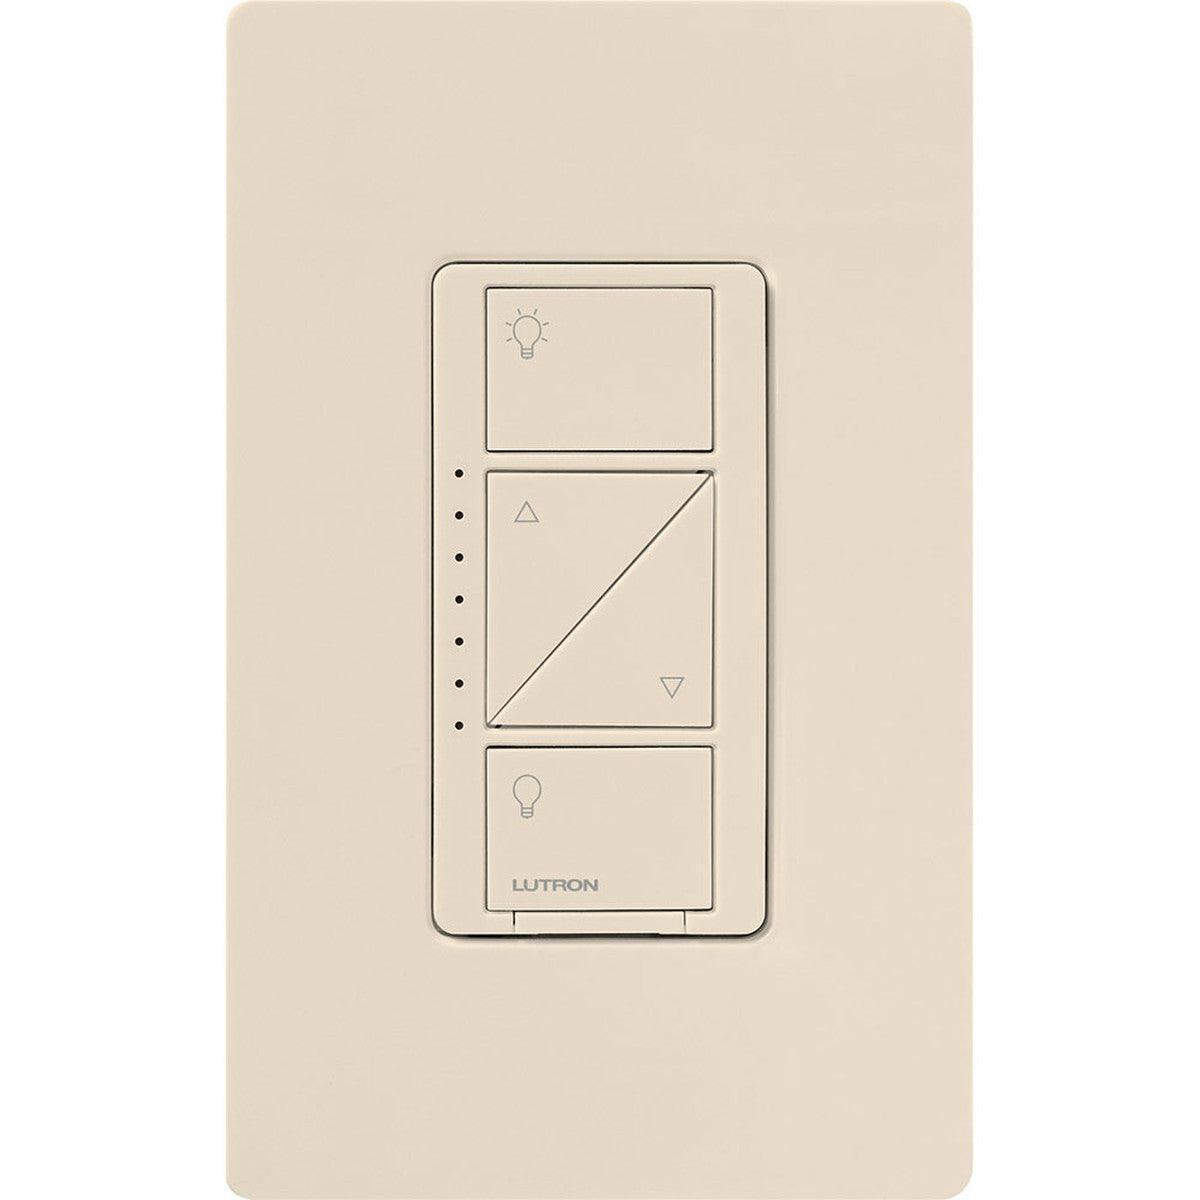 Lutron Caseta Dimmer Switches and Light Switches - Bees Lighting